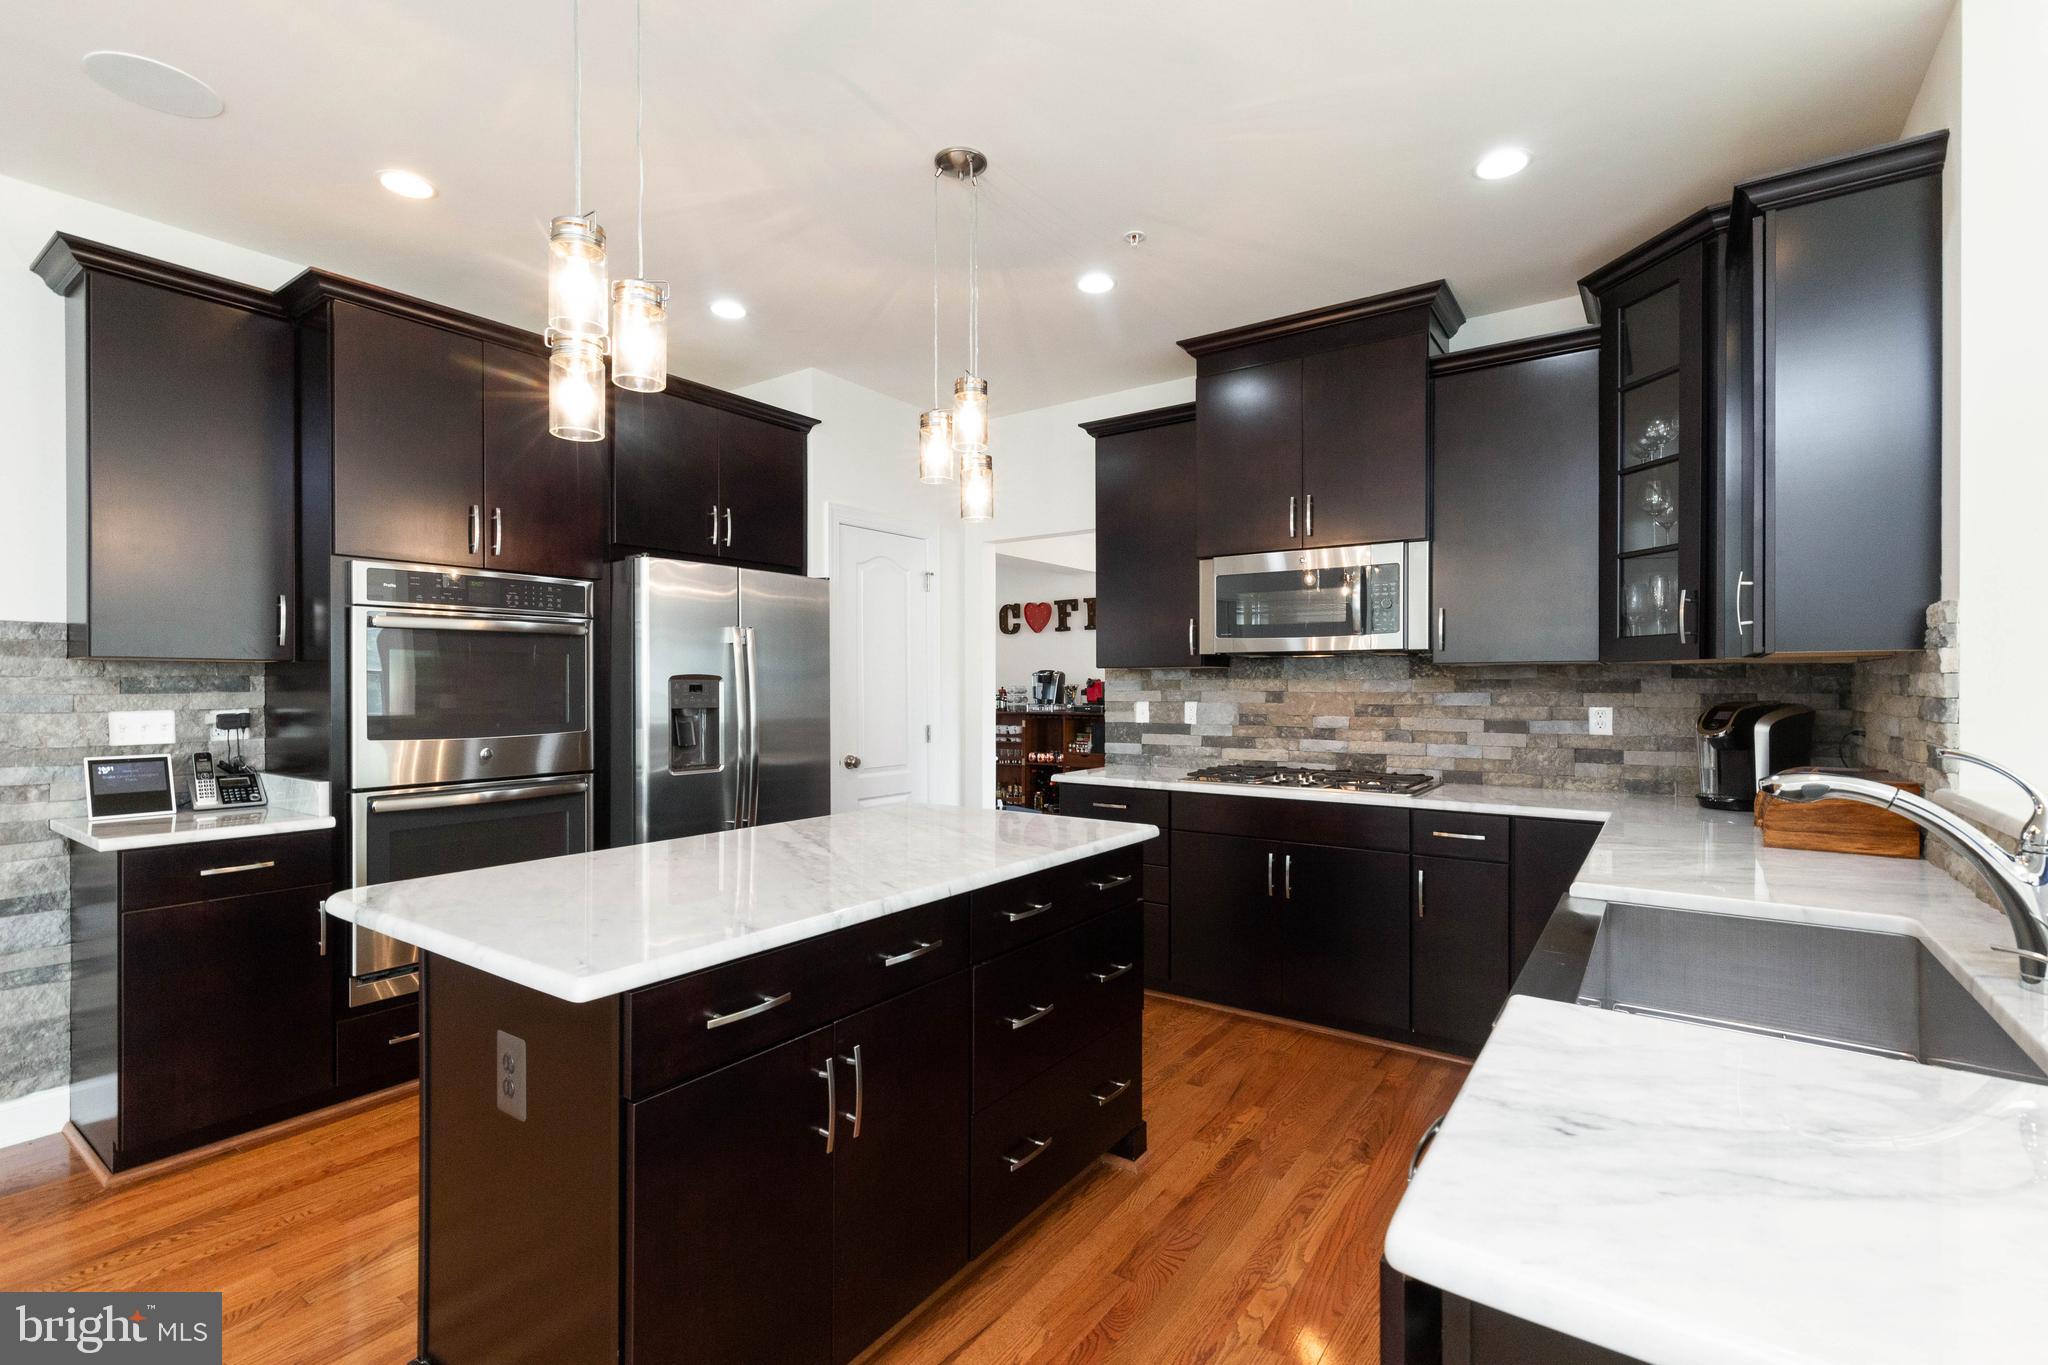 a large kitchen with stainless steel appliances kitchen island granite countertop a stove refrigerator and cabinets